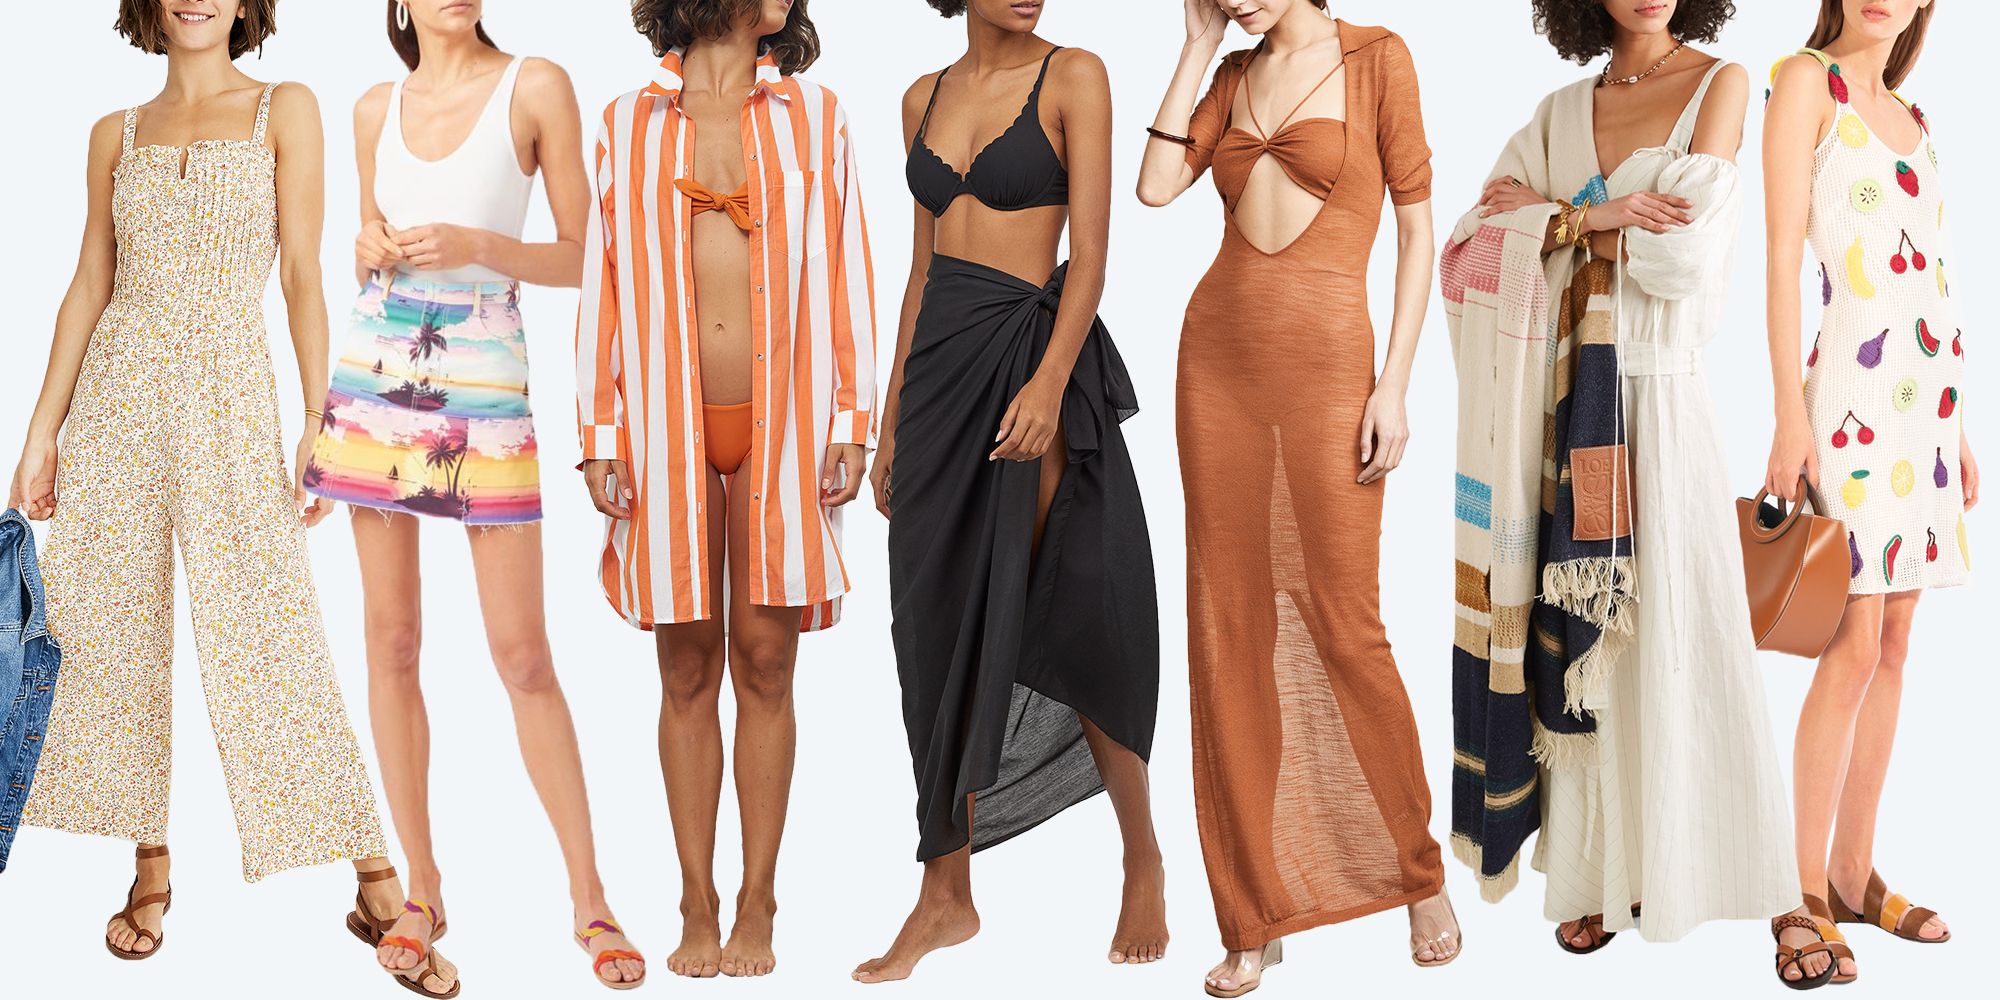 Night Beach Party Outfit Ideas  